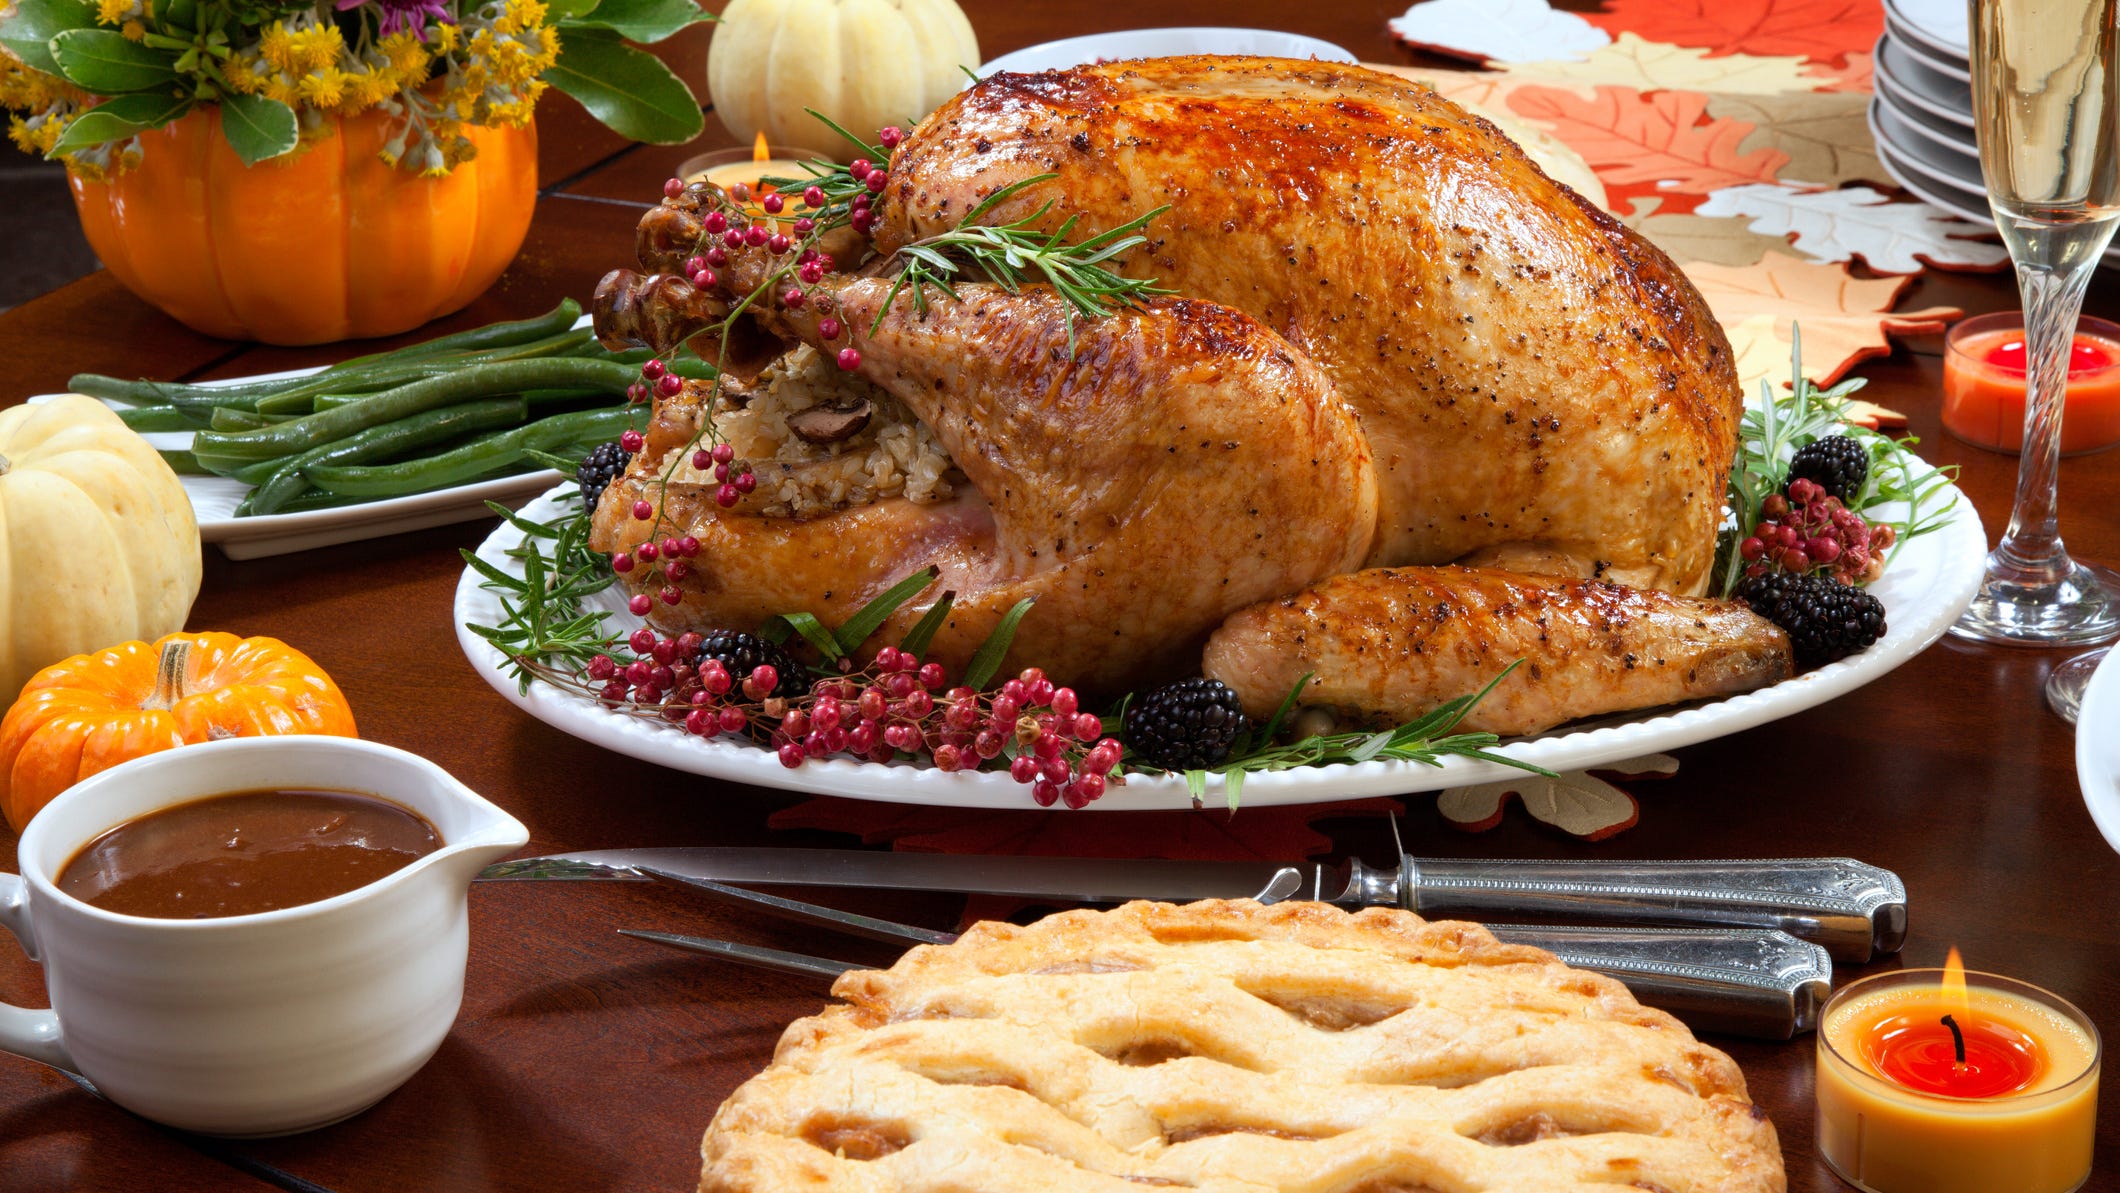 Make your reservations for a Thanksgiving meal at these local restaurants